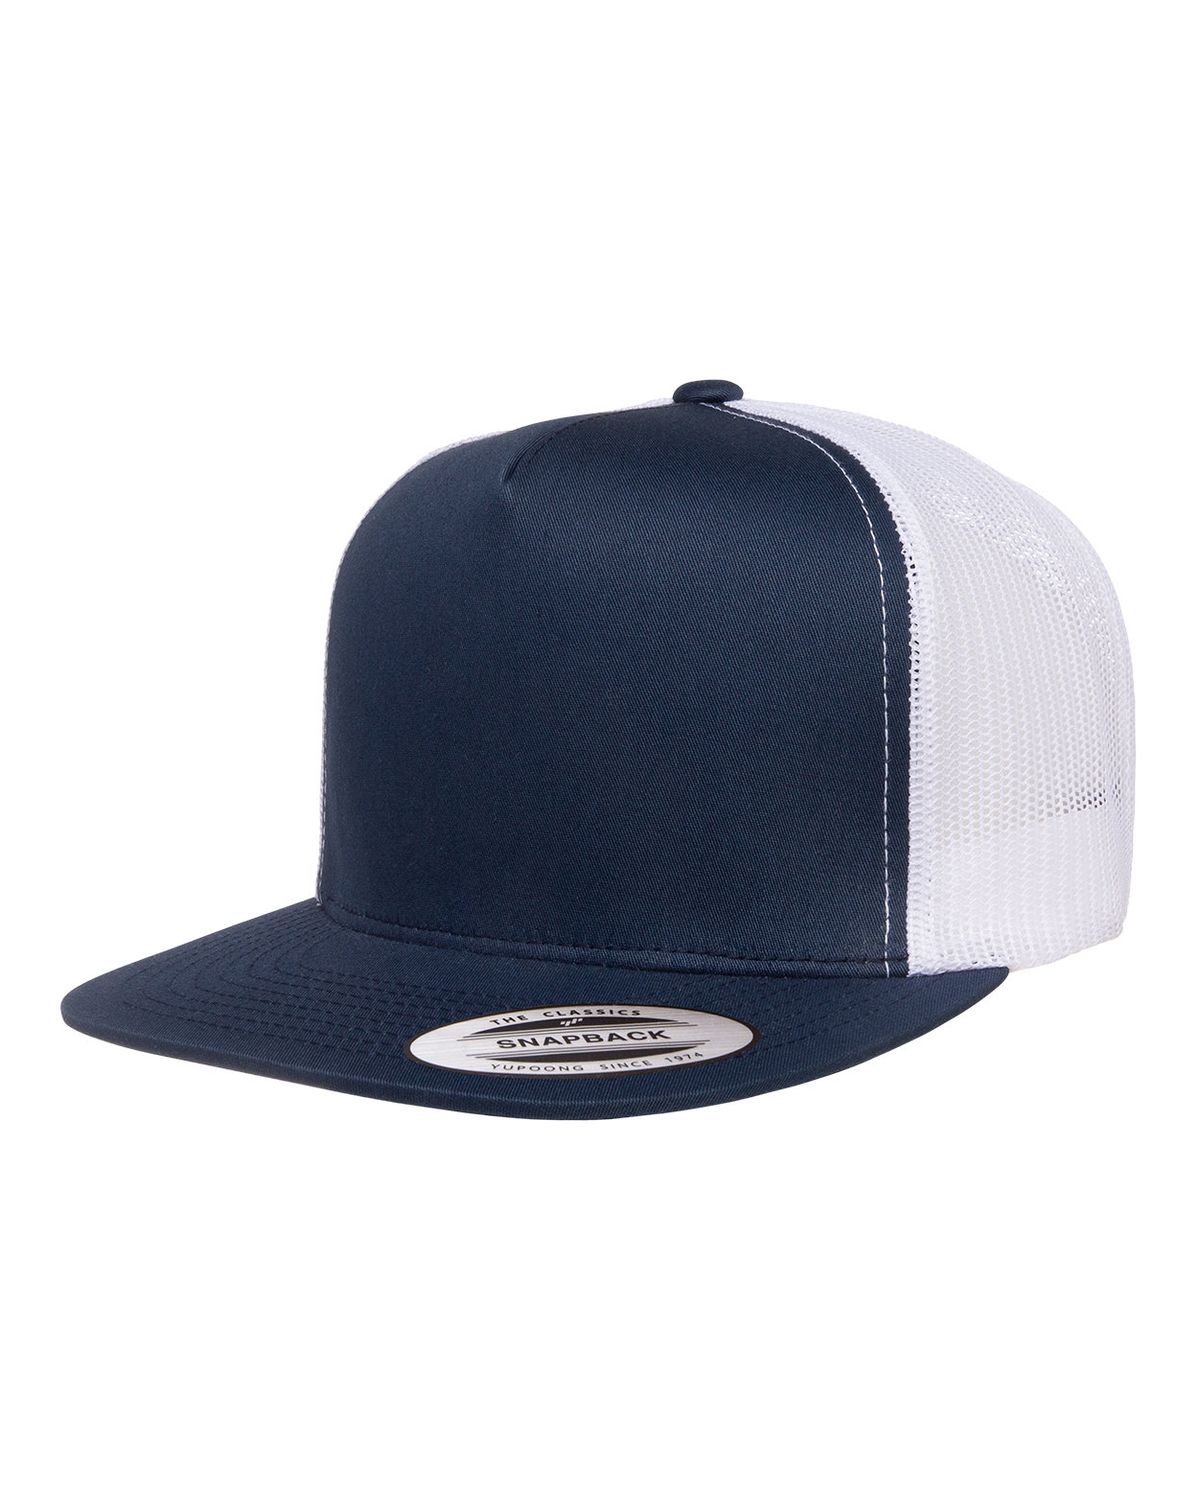 Yupoong Trucker Price Cheap at Classic 6006 Available Cap